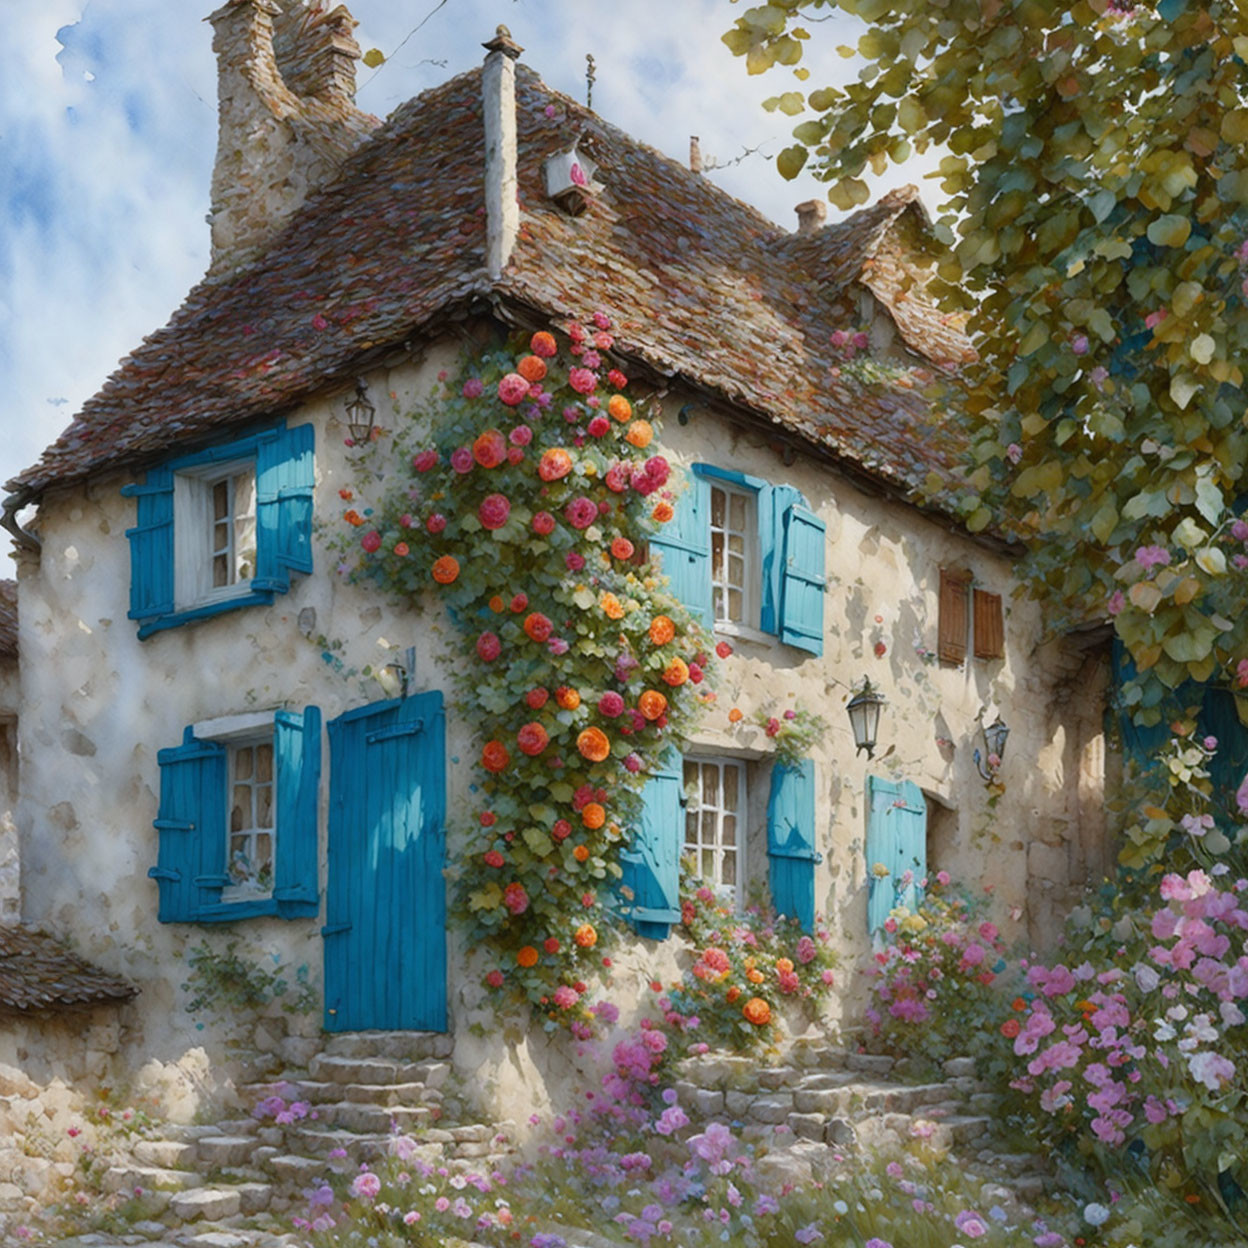 Thatched Roof Cottage with Blue Shutters and Roses in Bloom